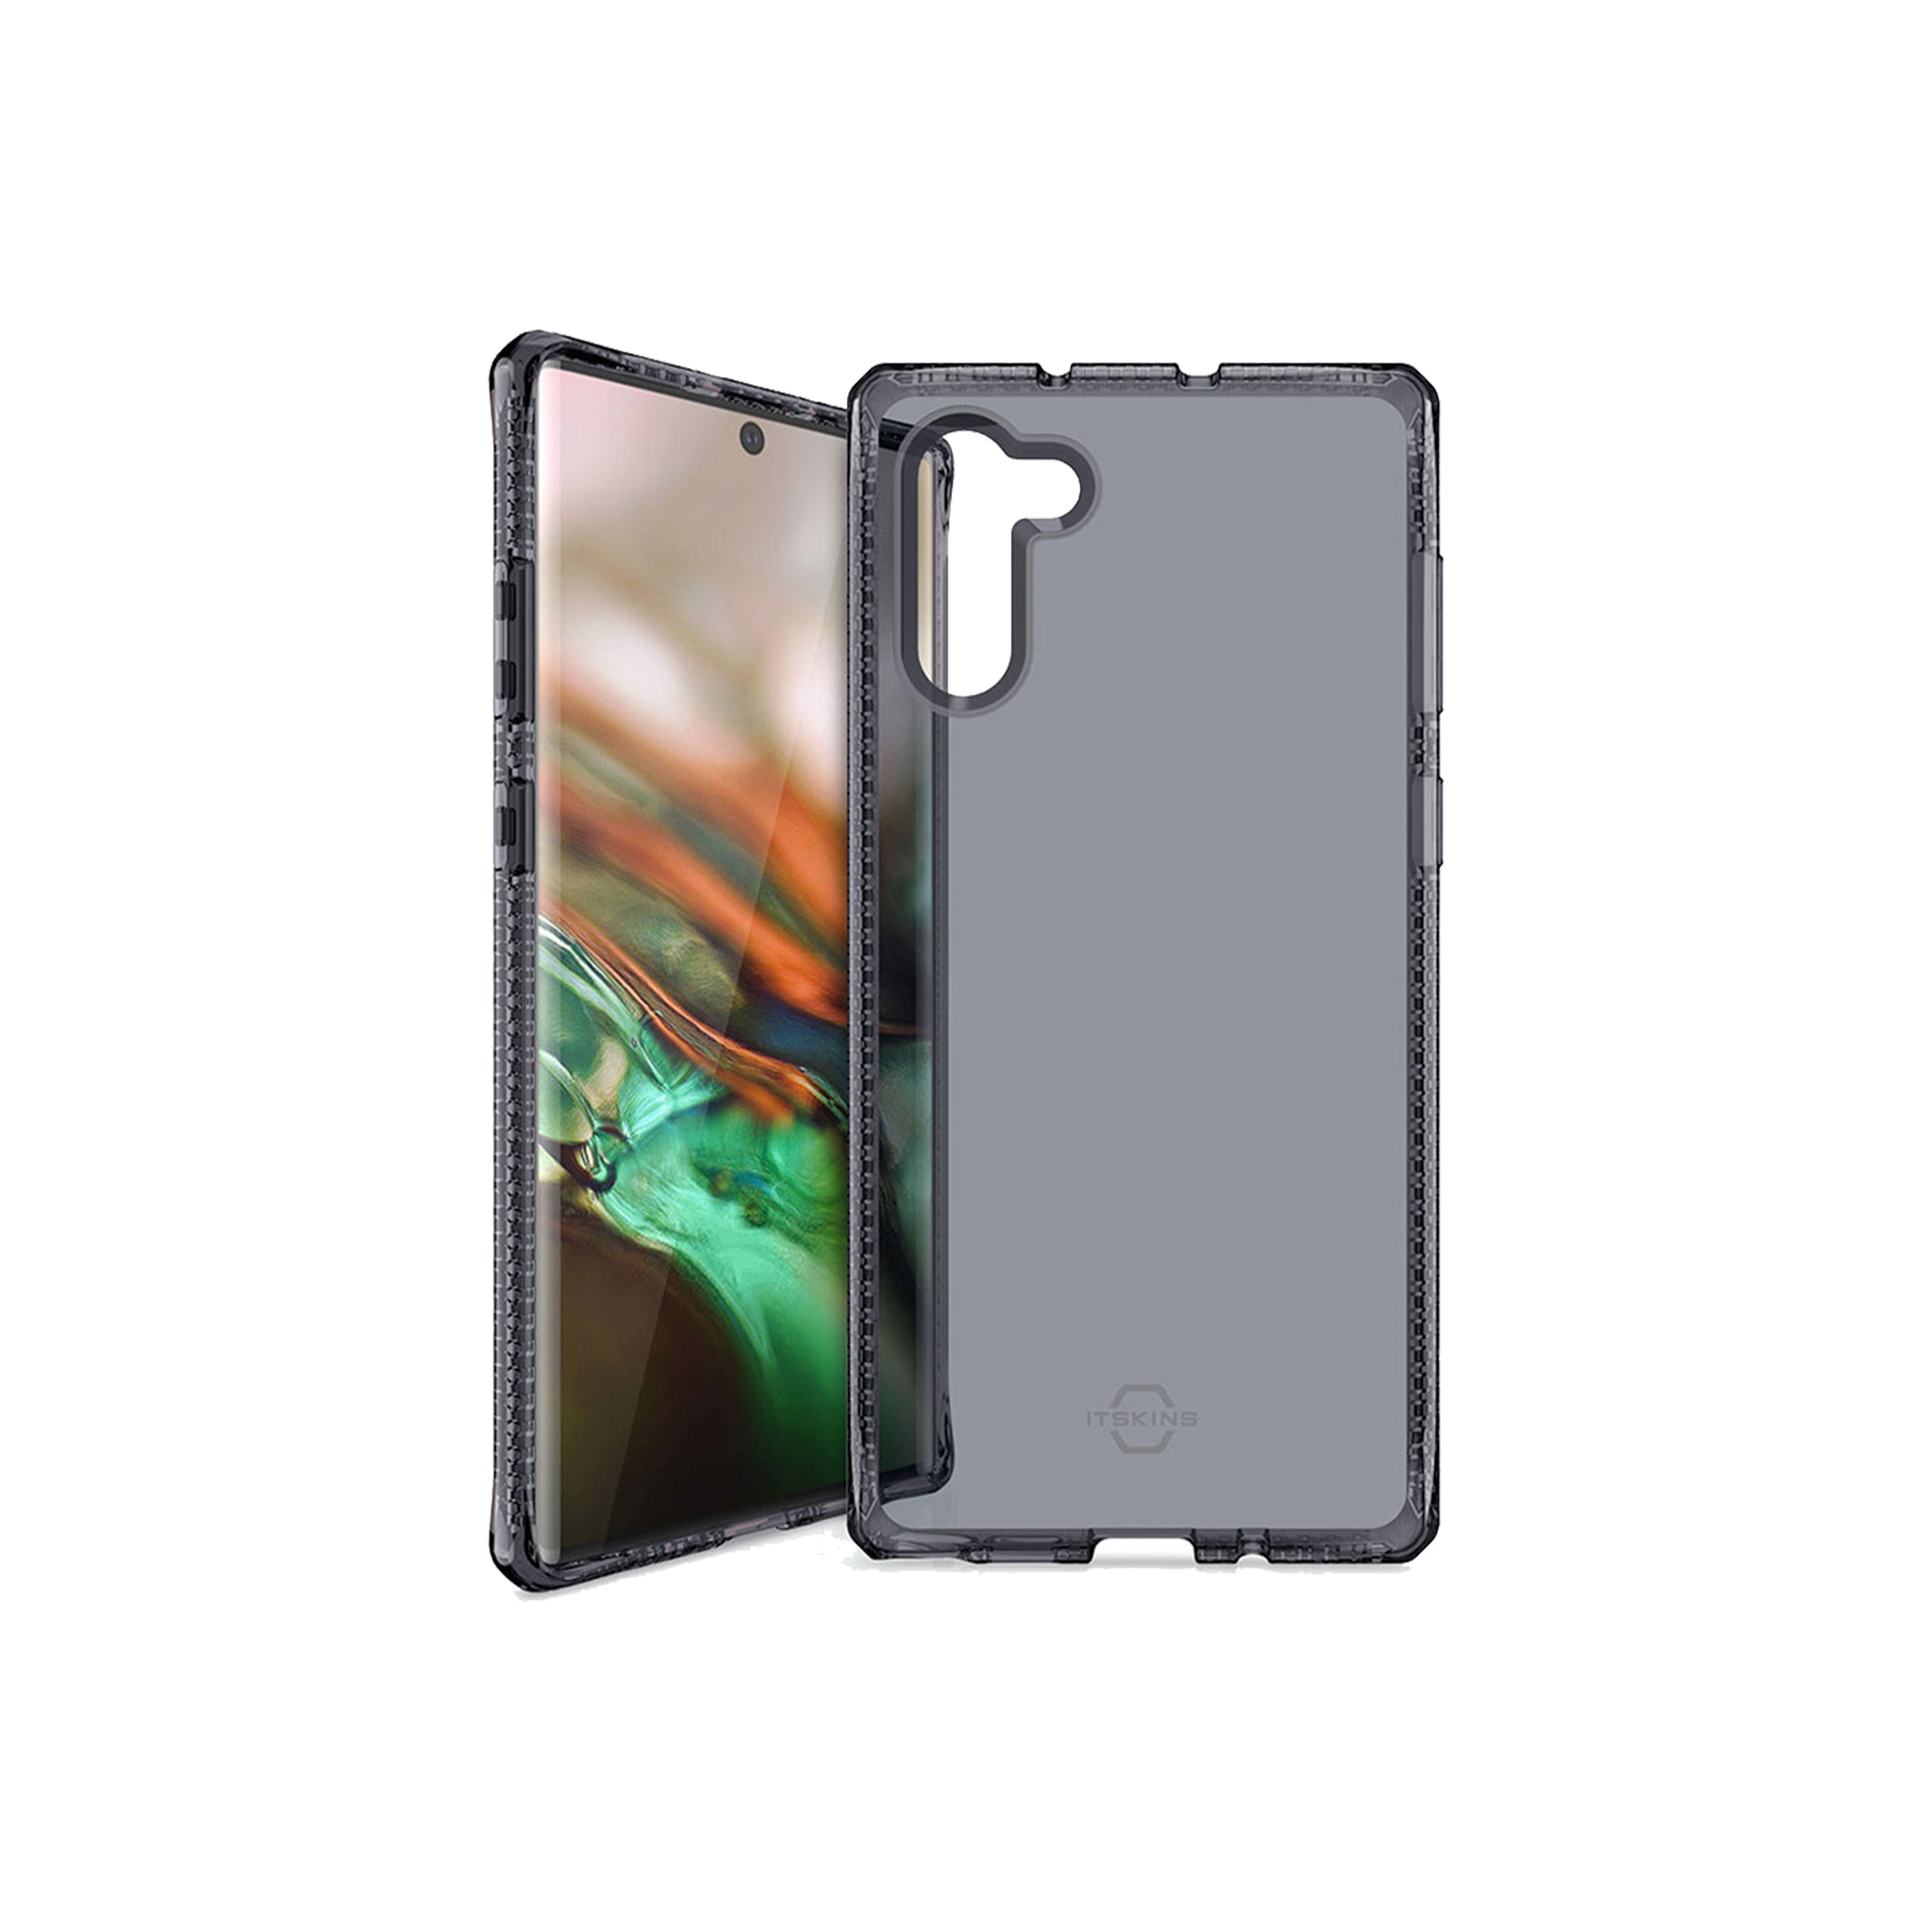 Itskins - Spectrum Clear Case For Samsung Galaxy Note 10 Plus - Smoke